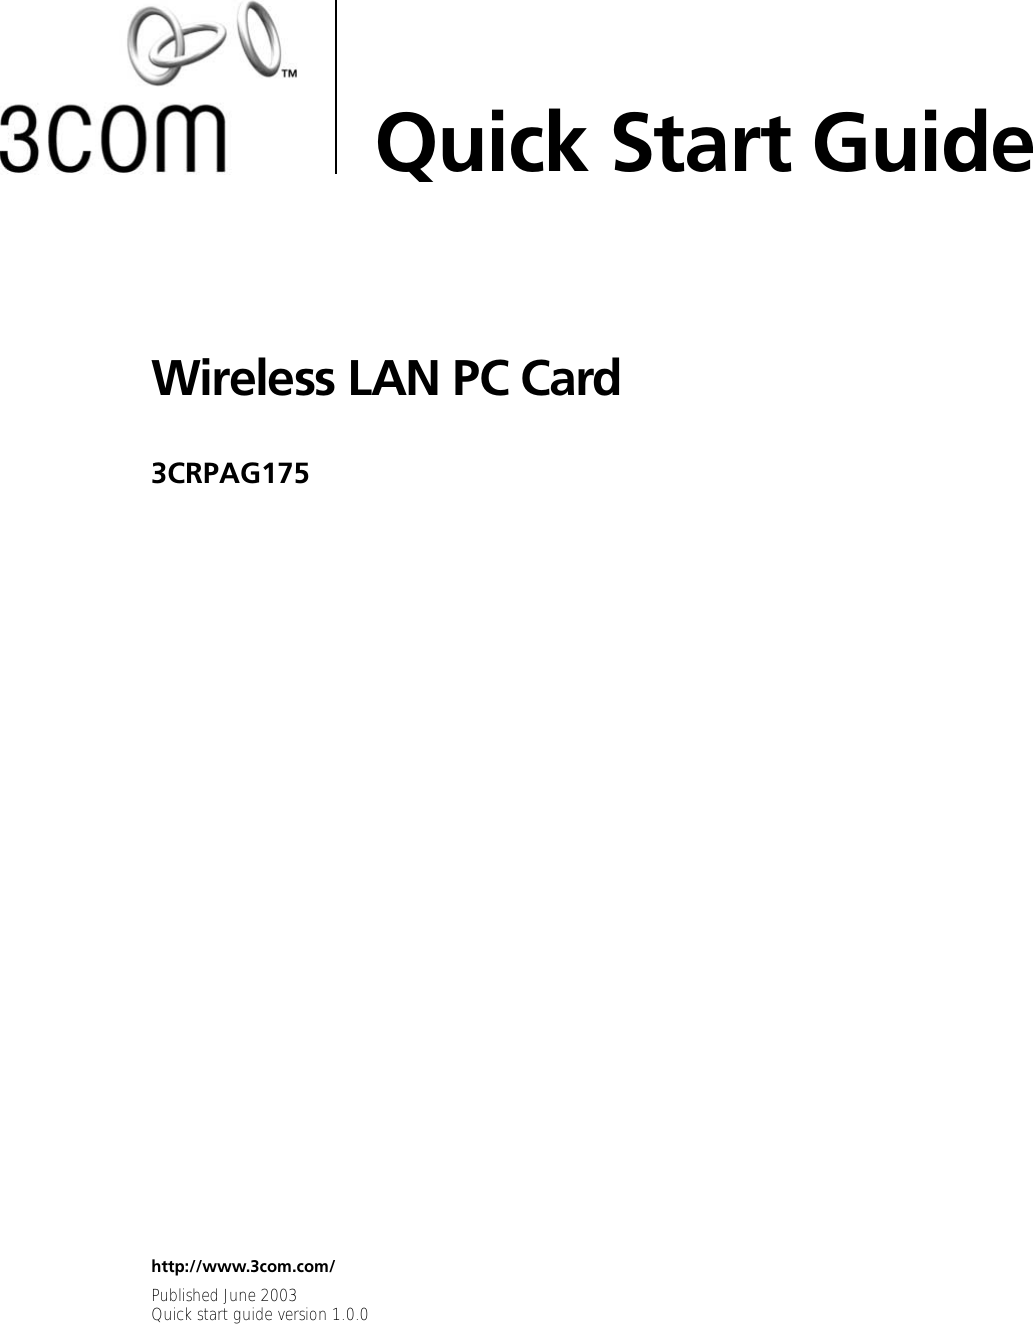 Wireless LAN PC Card3CRPAG175Quick Start Guidehttp://www.3com.com/Published June 2003Quick start guide version 1.0.0